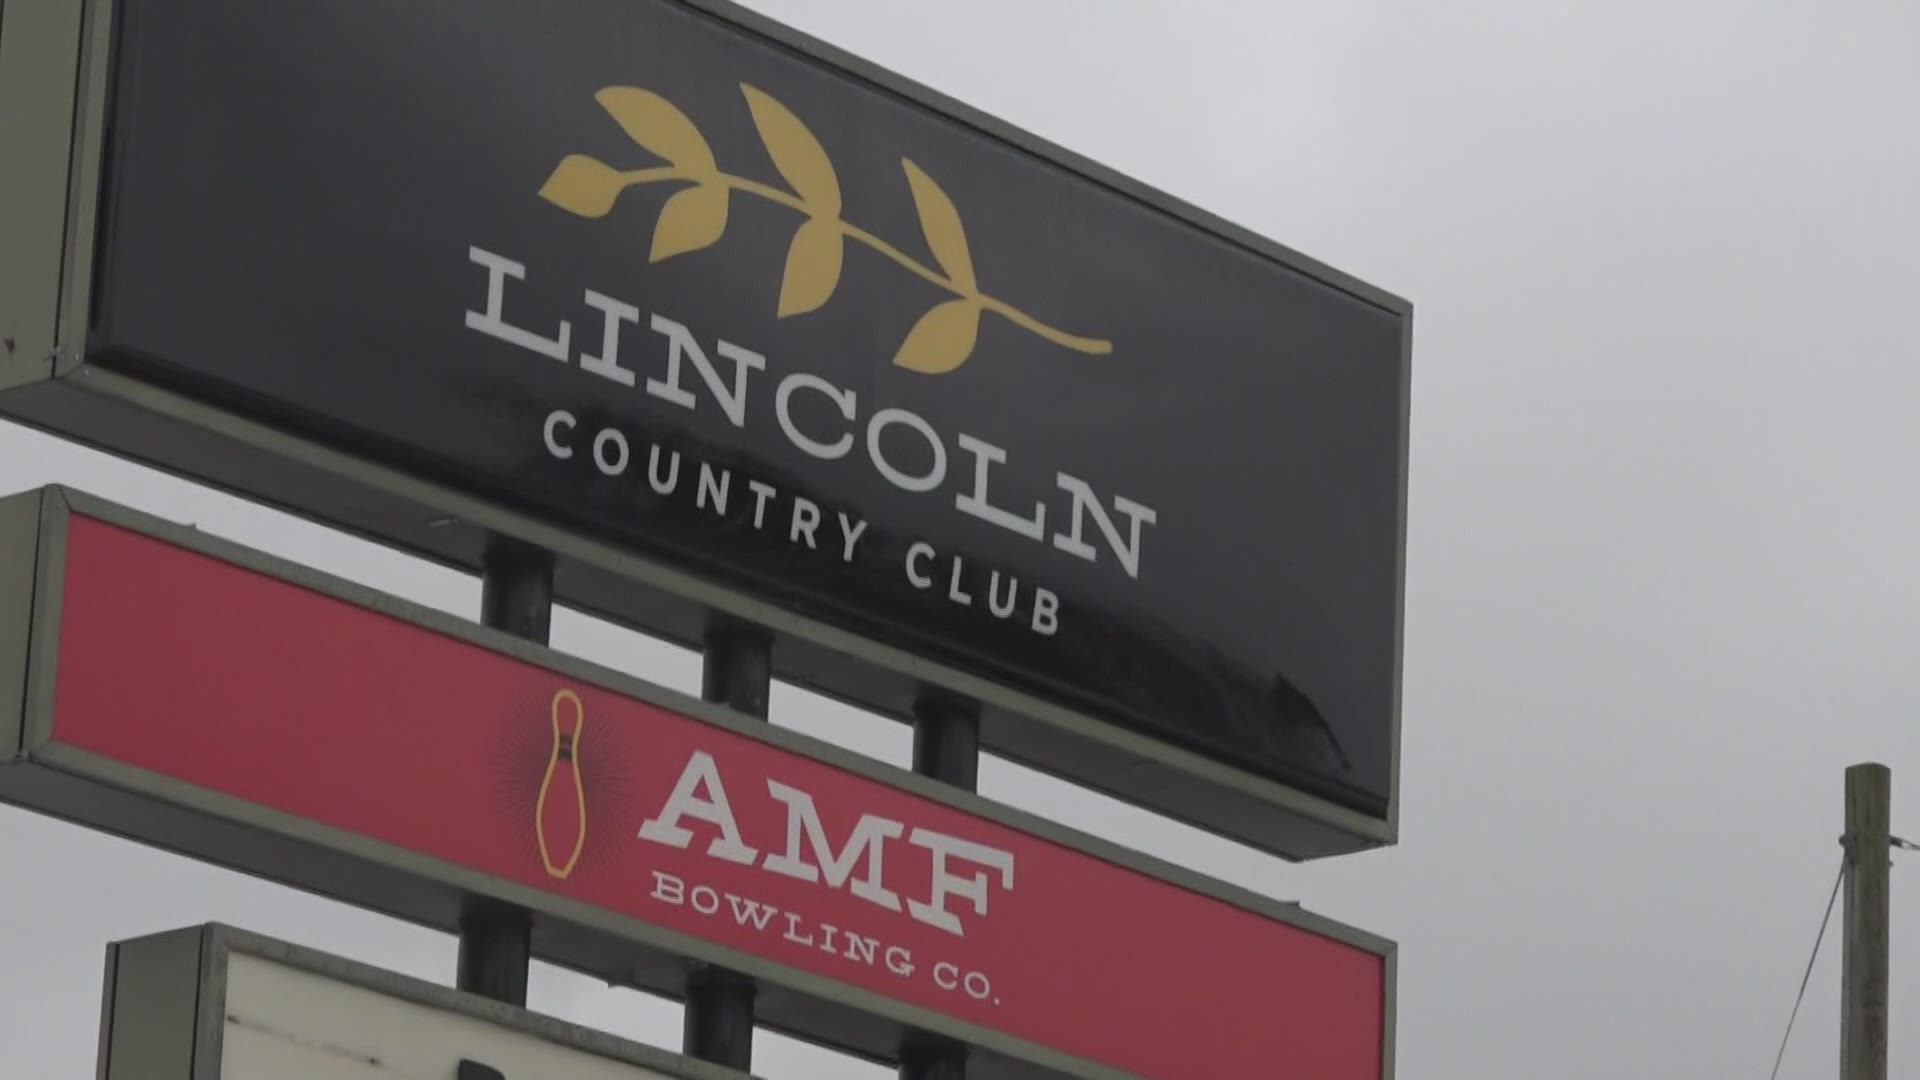 New proposal for Lincoln Country Club redevelopment, public hearing tentatively scheduled.